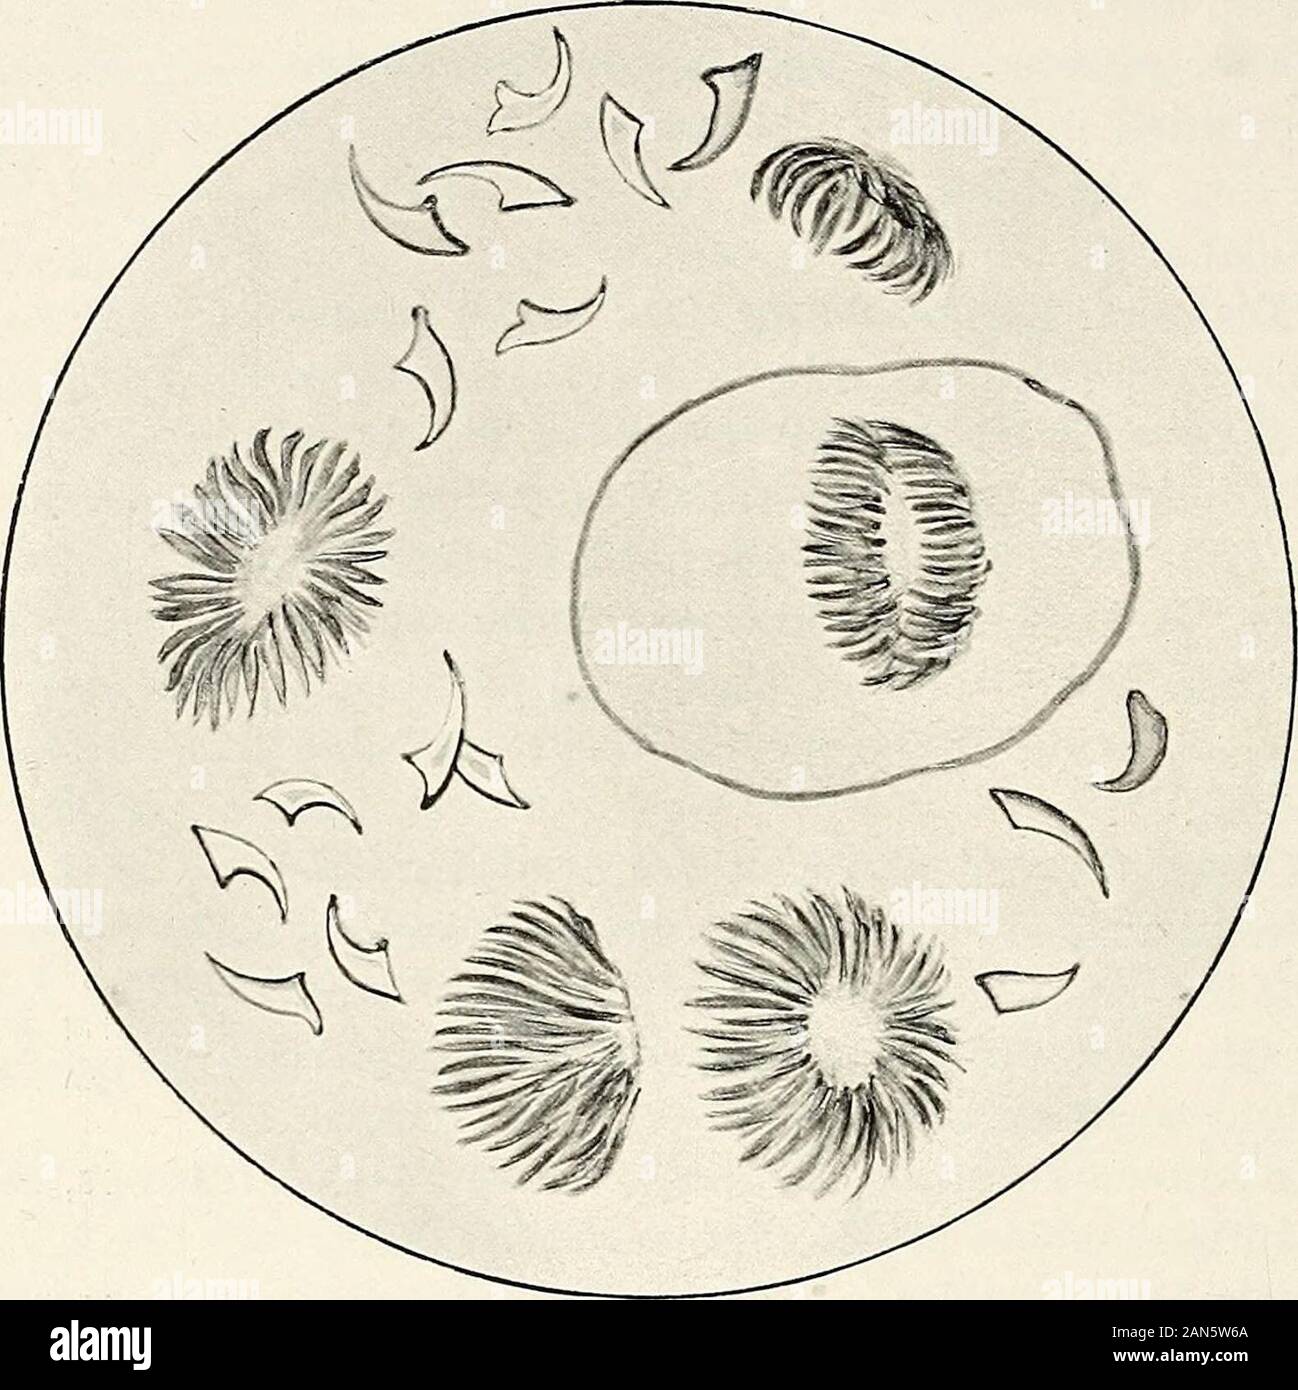 Gynaecology for students and practitioners . Fig. 154. Tricho-monas VaginalisHighly magnified(H. Futh). It is very difficult to prove the parasitic nature of vulvitis andcolpitis in children, but in cases where the gonococcus cannot bedemonstrated, careful search for the oxym^is should be made, and thebowel washed out with infusion of quassia. The vaginitis shouldat the same time be treated by syringing with a weak antiseptic,such as 1-2 per cent, lysol-solution. Cystitis should be treated bywashing out the bladder with 1 per cent, protargol-solution and bygiving urotropin per os. Papillary gr Stock Photo